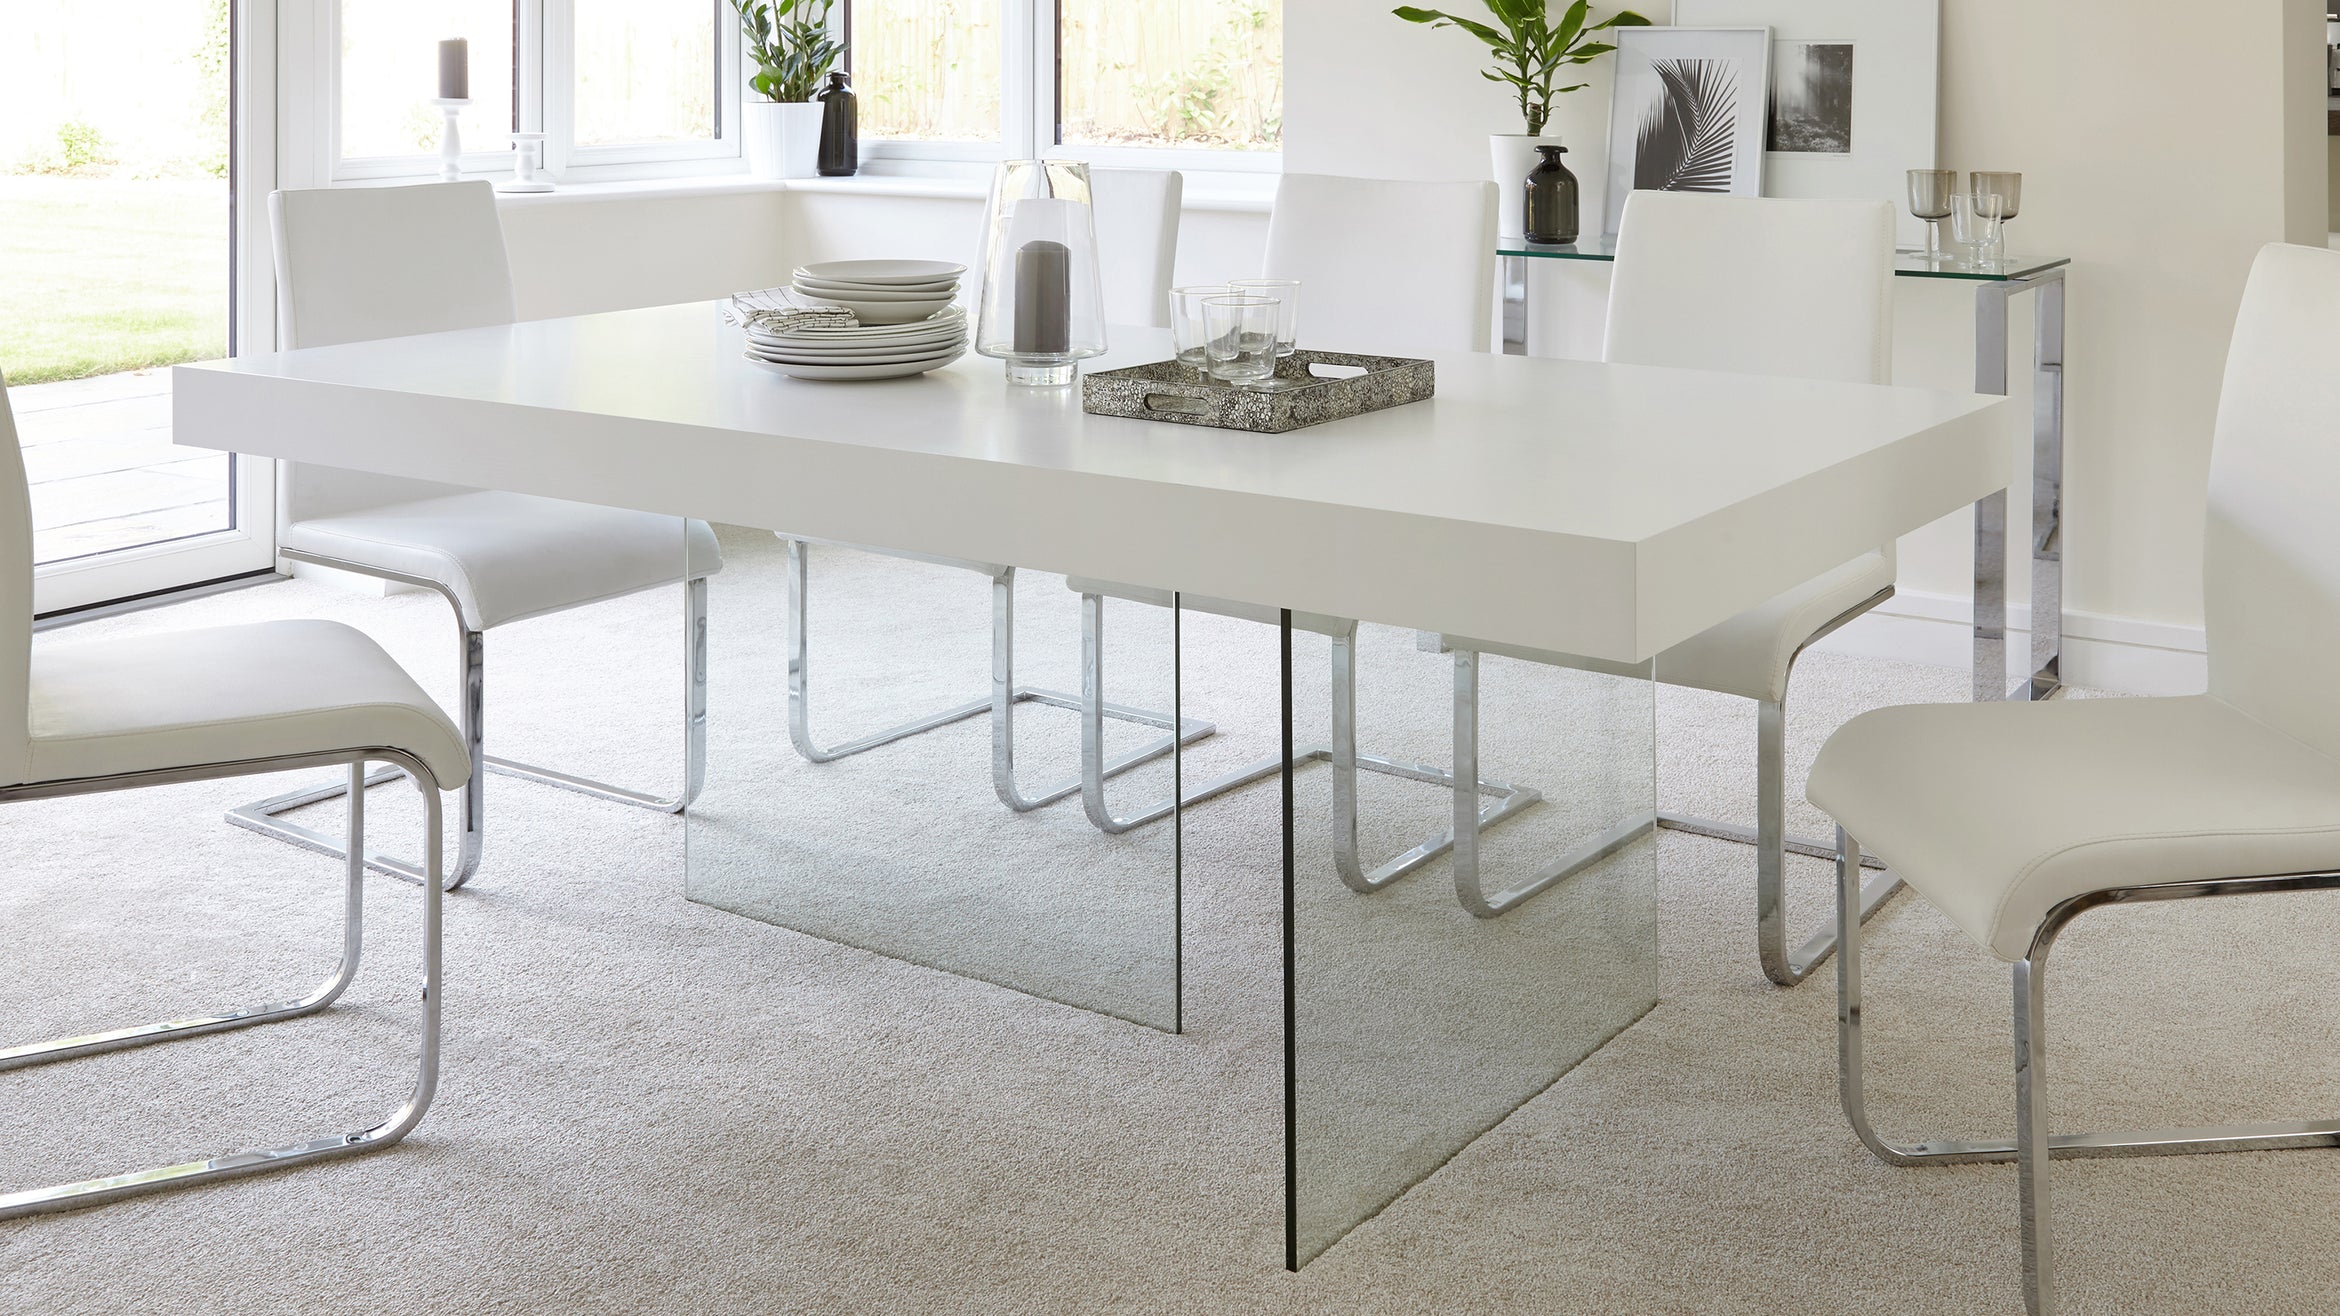 Stunning Modern Dining Sets – with a Further 10% Off!